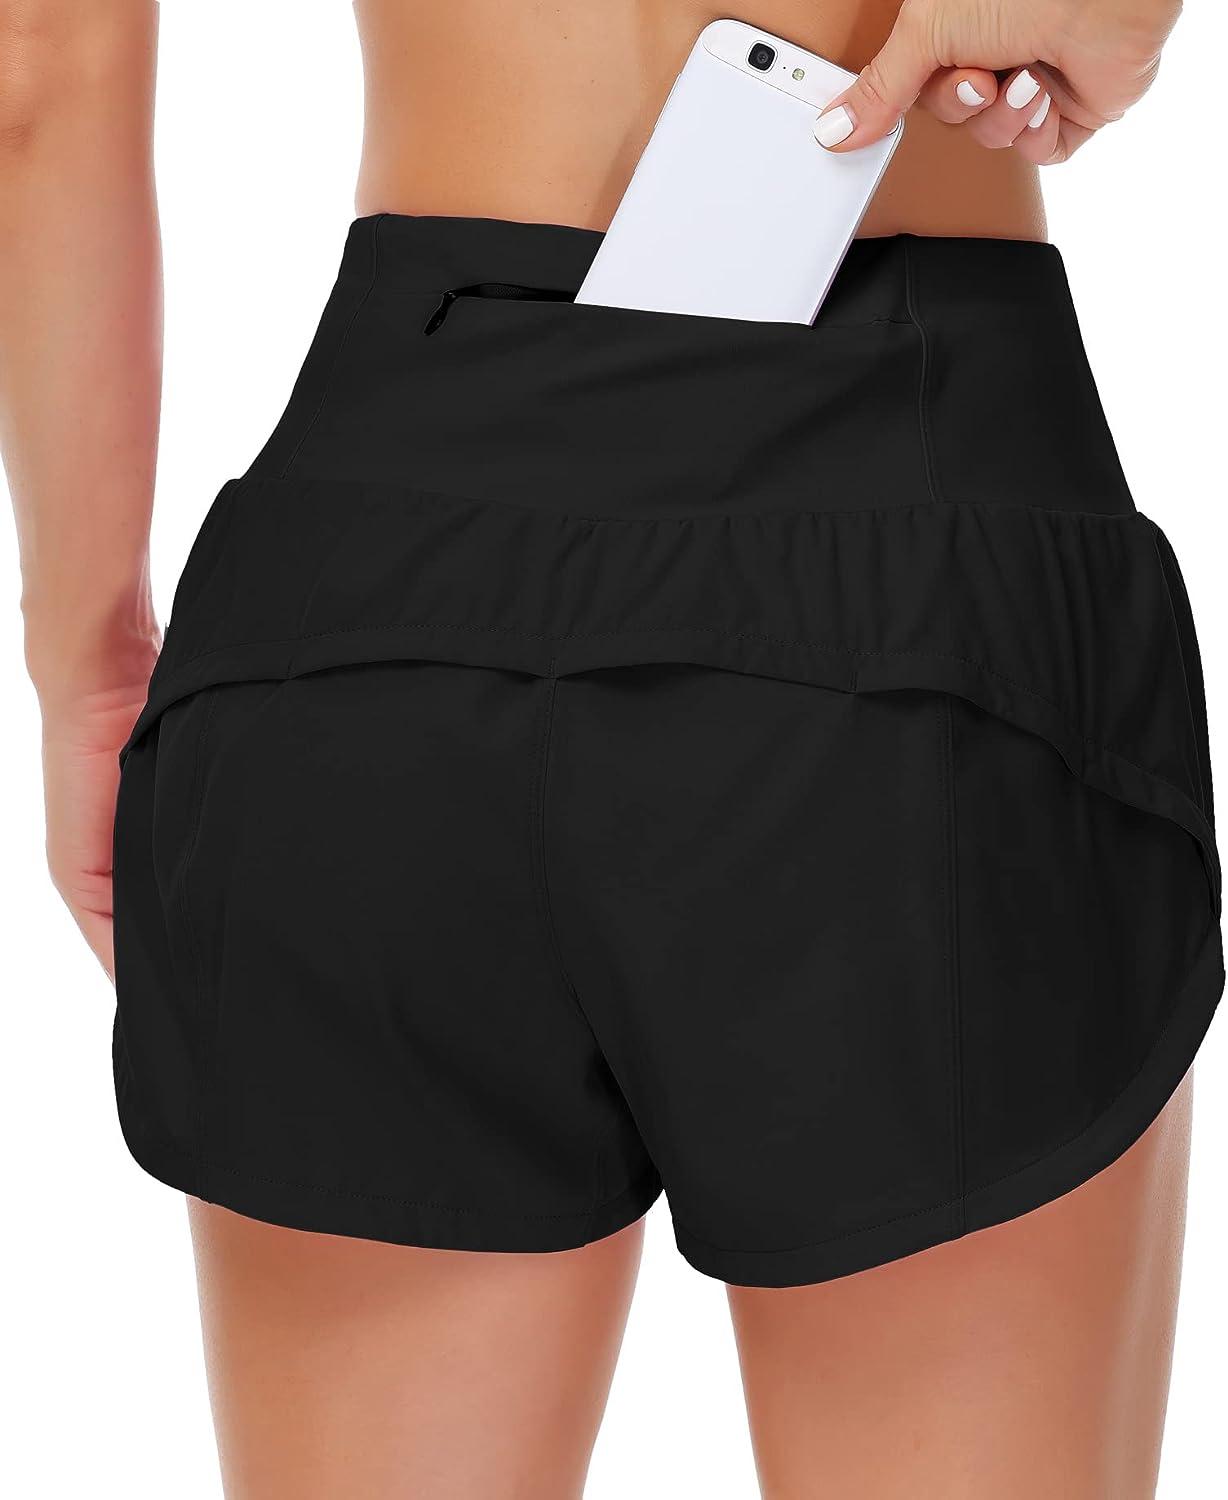 Origiwish Women's High Waisted Running Shorts with Liner Quick Dry Athletic  Workout Shorts Zipper Pockets Small Black